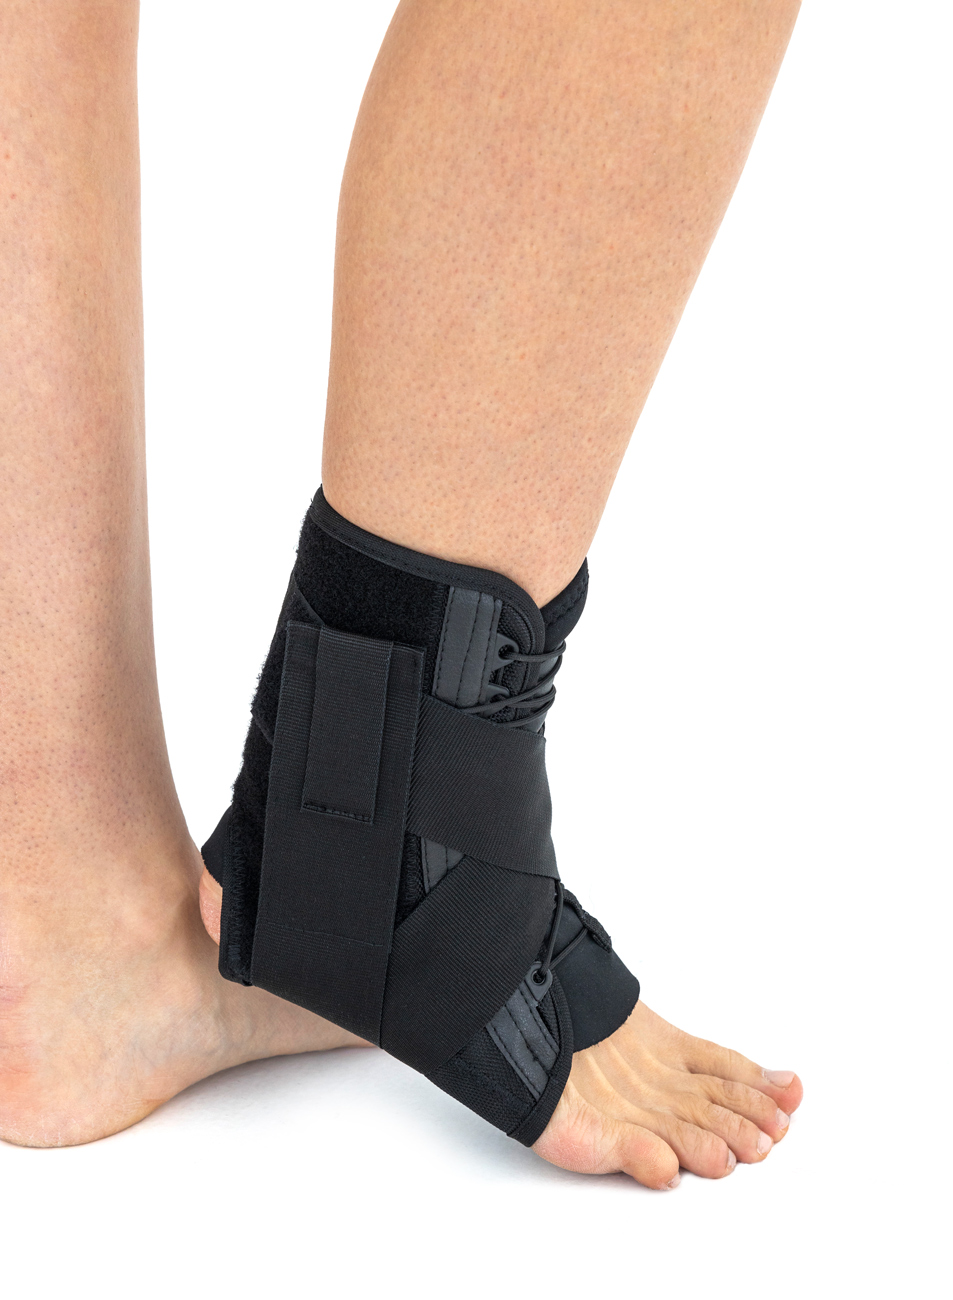 Should I Wear an Ankle Brace to Bed or Overnight?